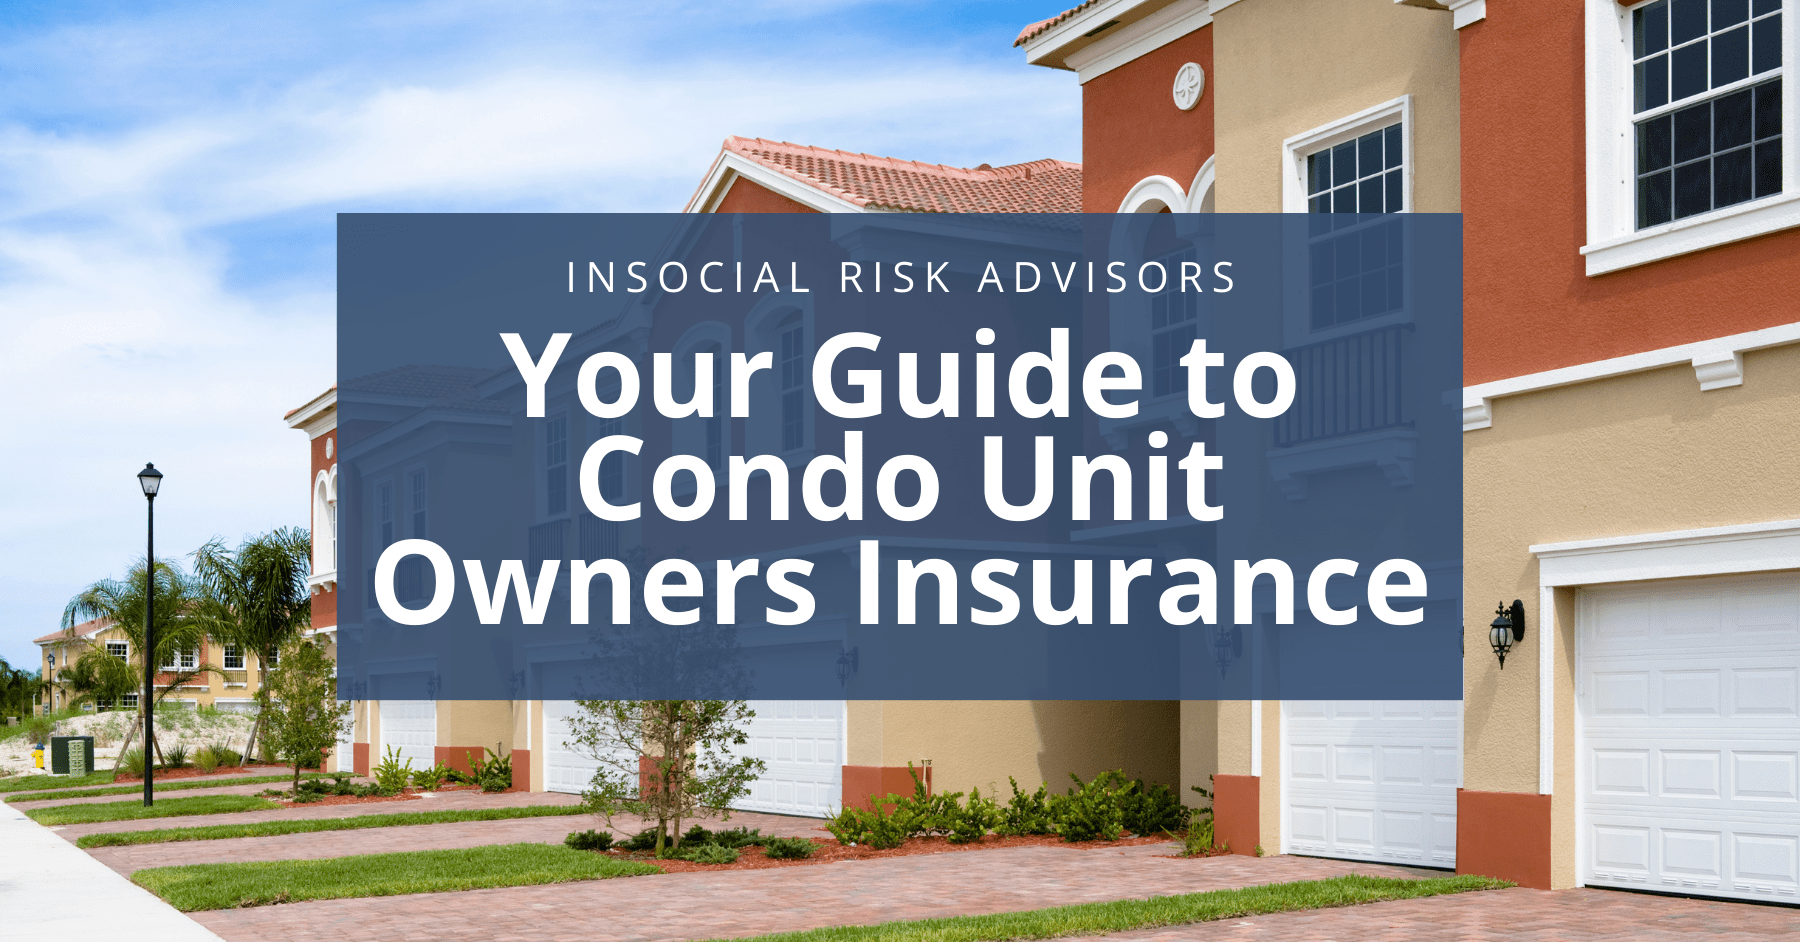 Condo Unit Owners Insurance Guide